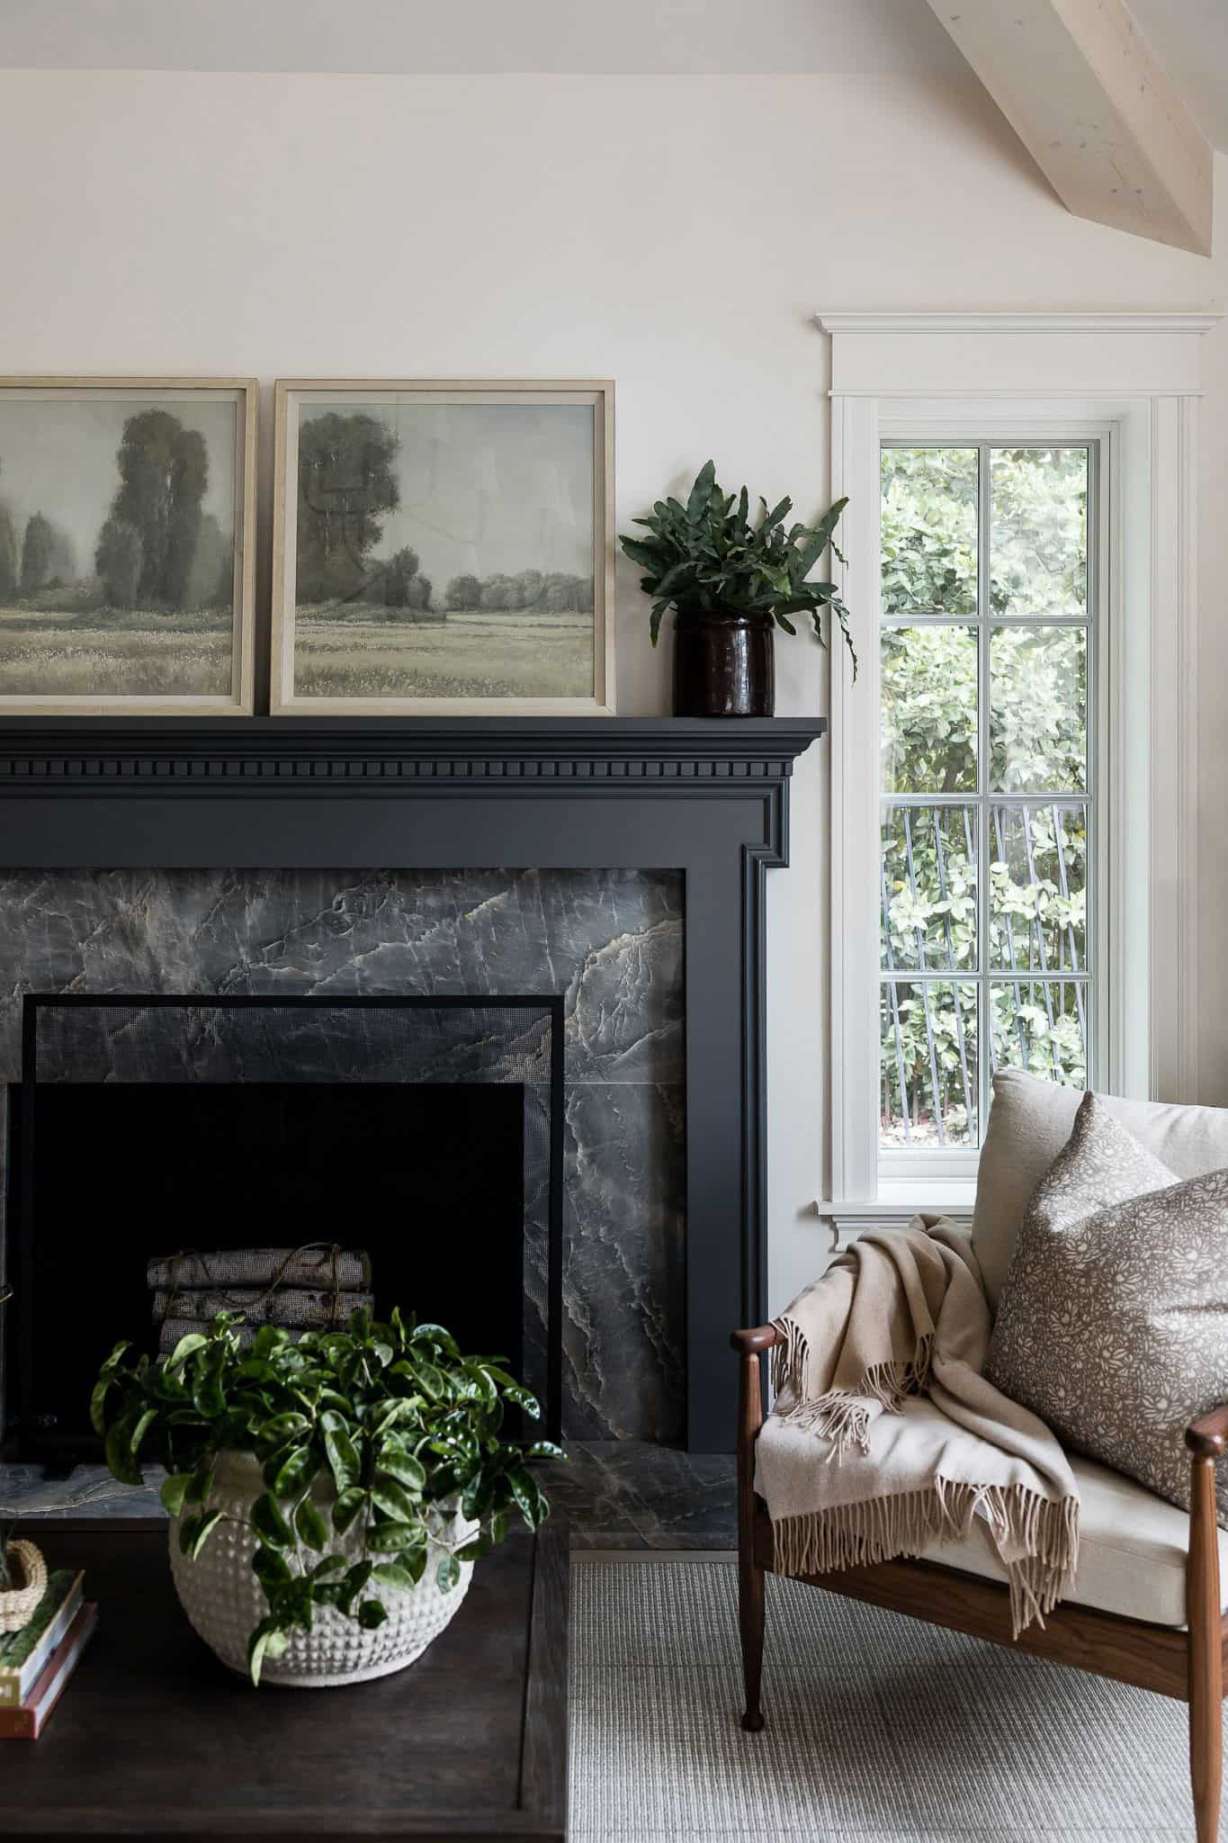 Mantel Décor Ideas That Look Amazing in Any Space